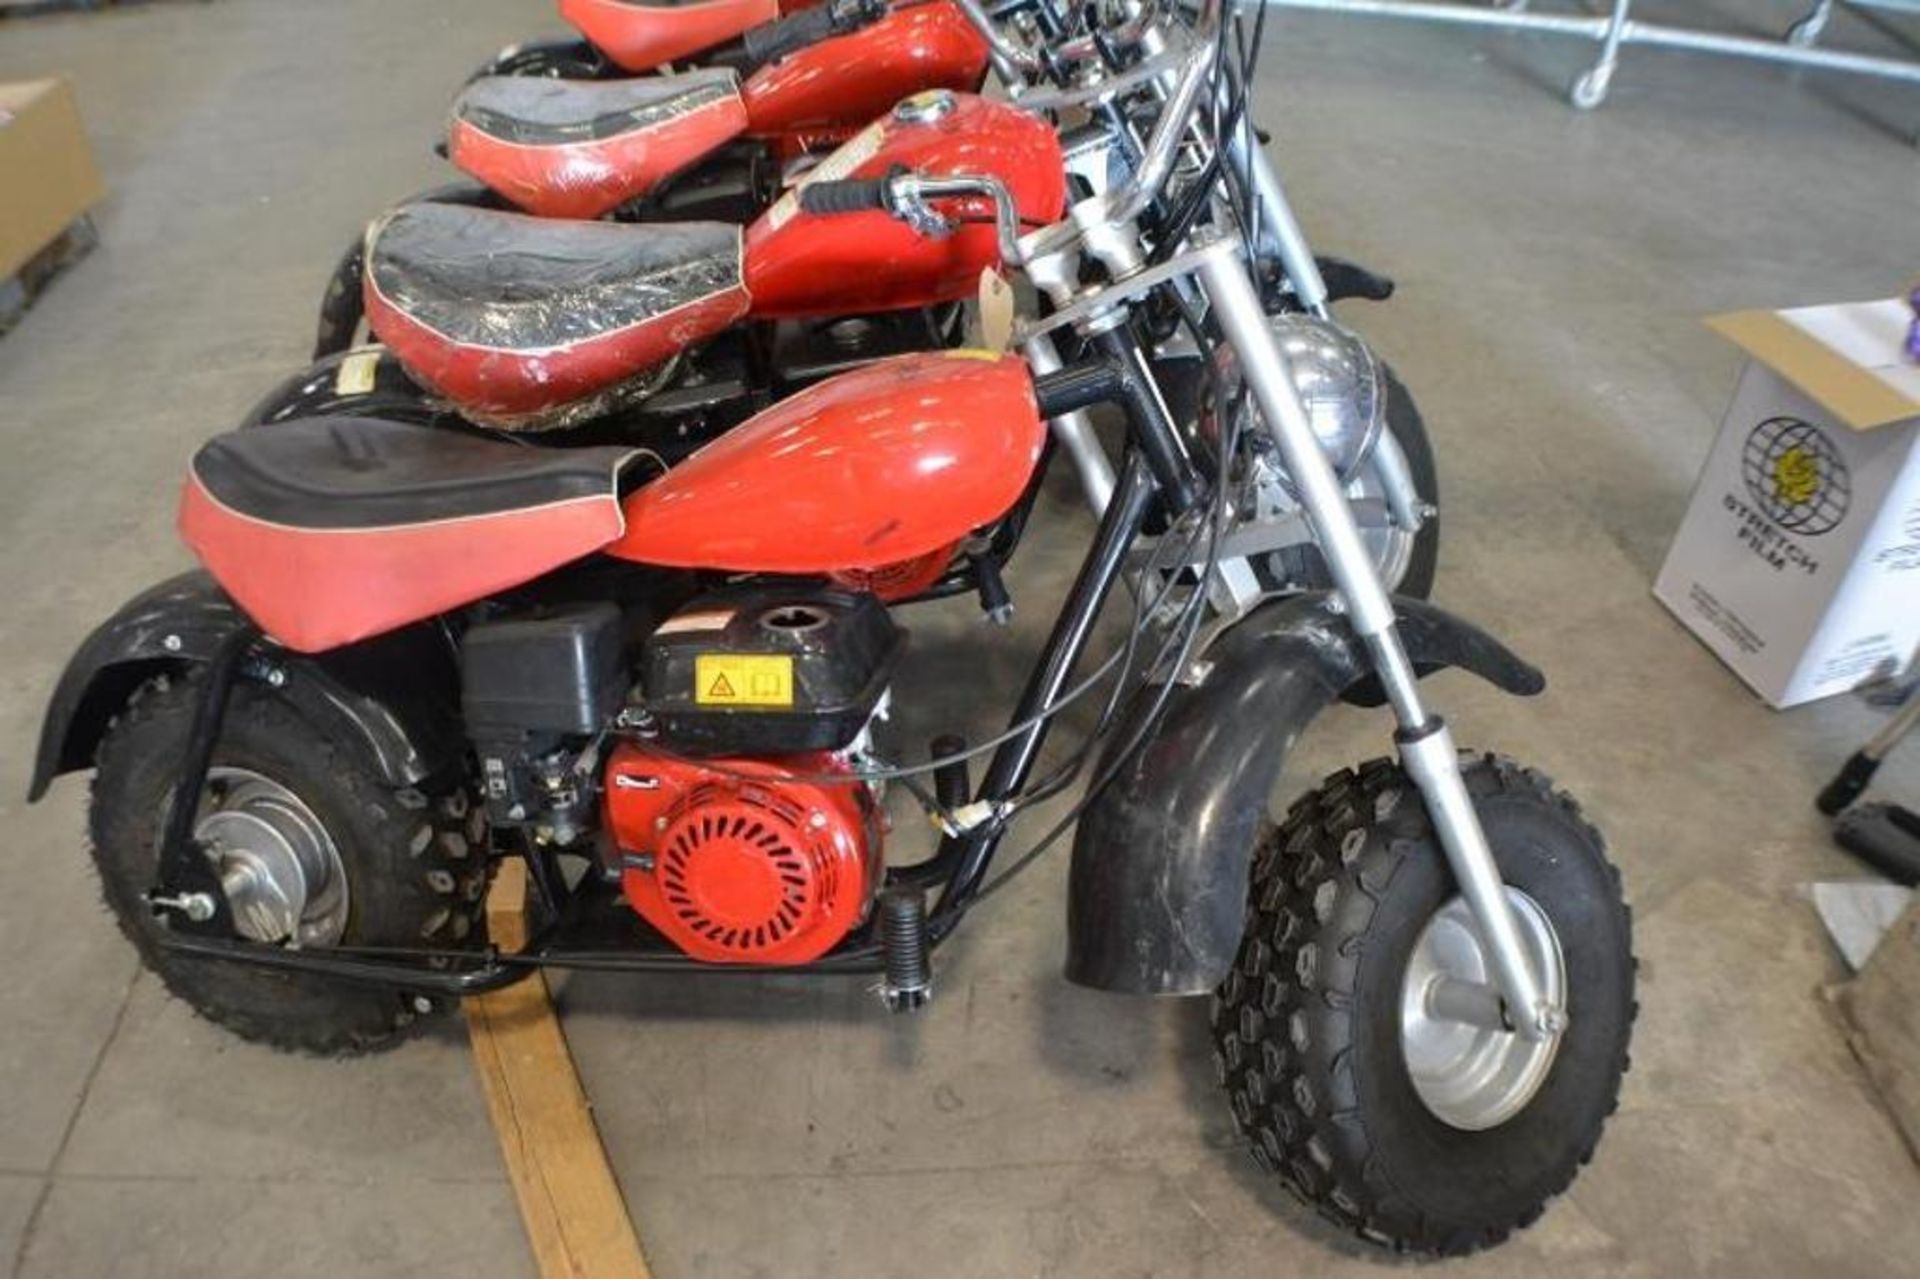 Chopper 196cc 4 Stroke. Red/Black Color fuel tank Cap is missing. This unit are for EXPORT ONLY. Buy